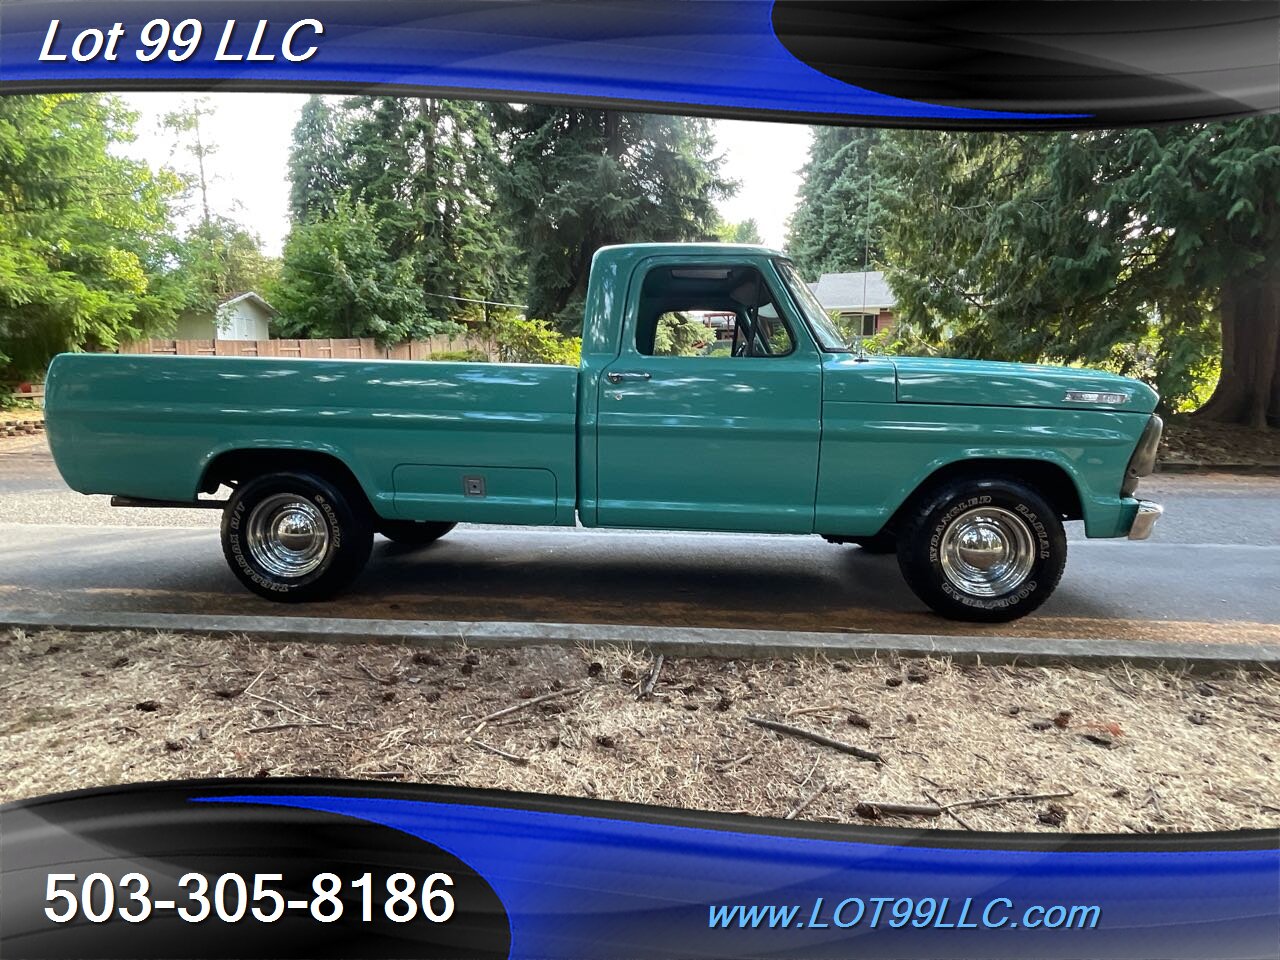 1967 Ford F-100 302 V8  Long Bed No Rust Solid Truck   - Photo 5 - Milwaukie, OR 97267